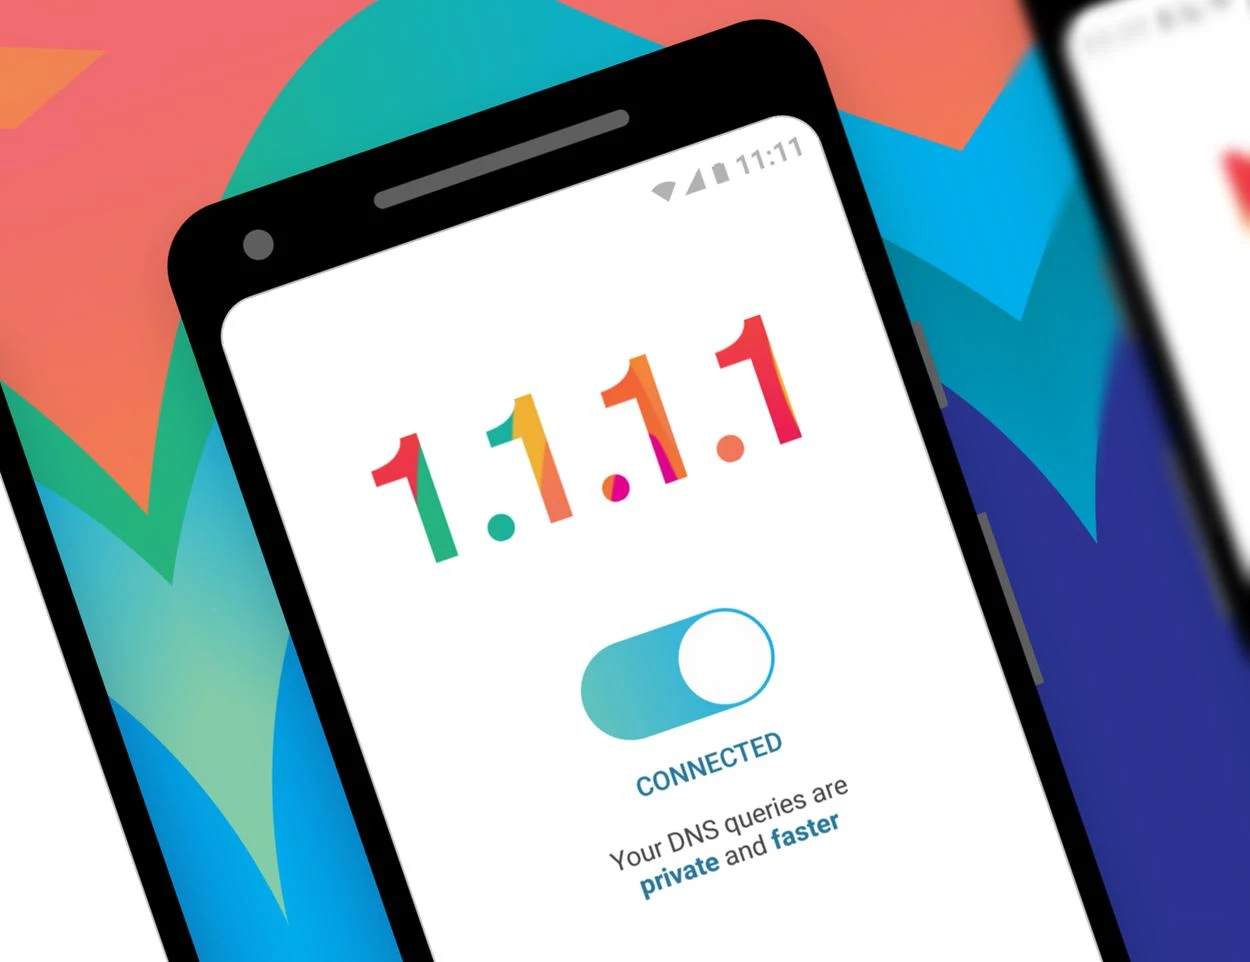 Cloudflare rolls out its 1.1.1.1 privacy service to iOS, Android 